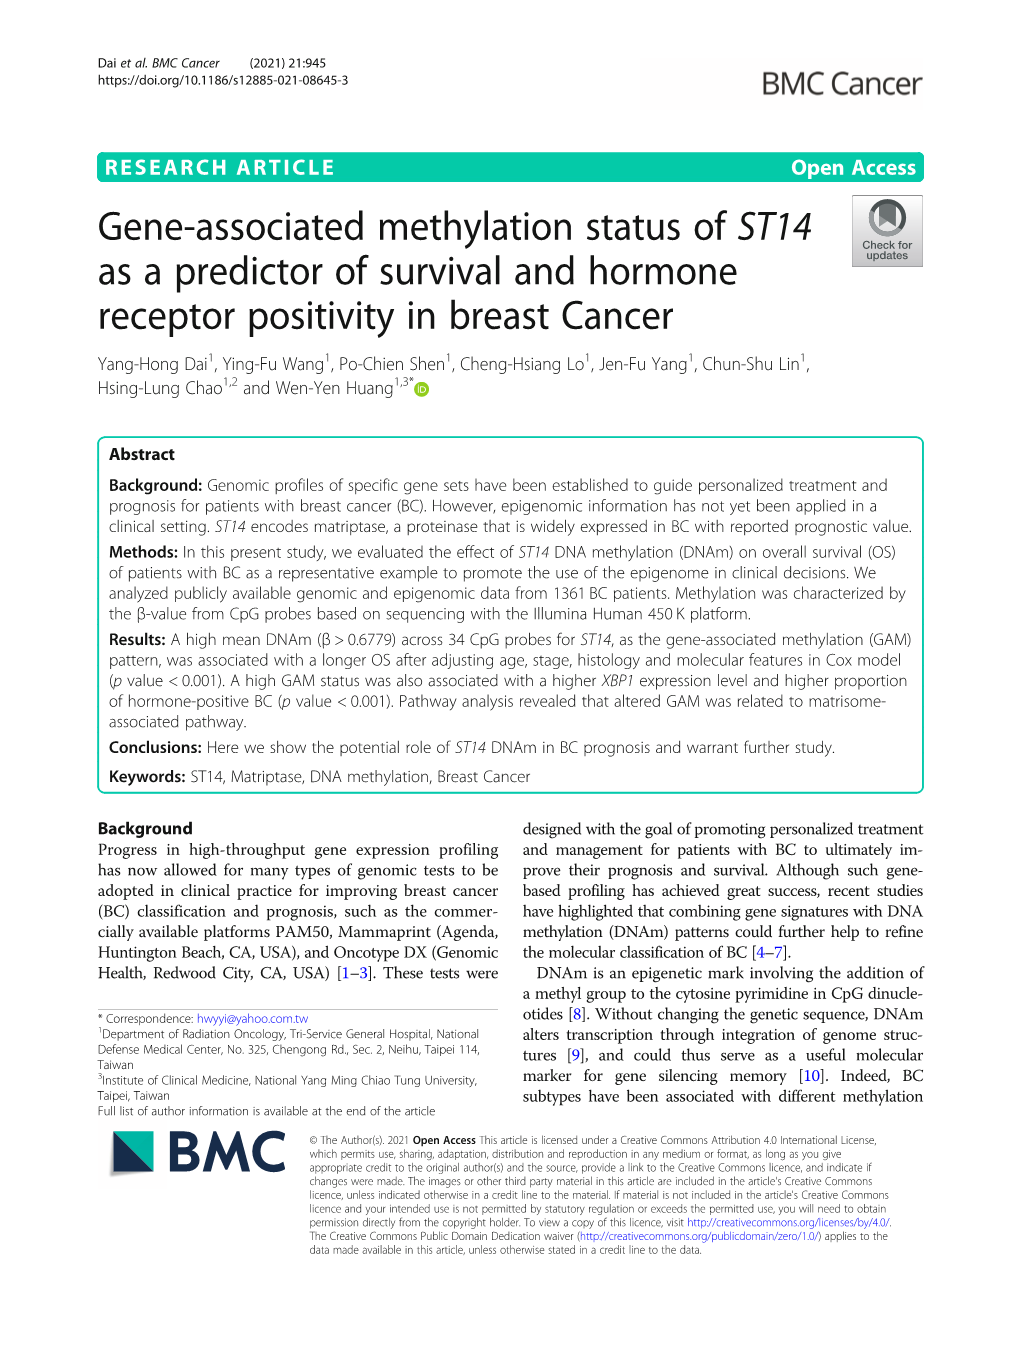 Gene-Associated Methylation Status of ST14 As a Predictor of Survival And